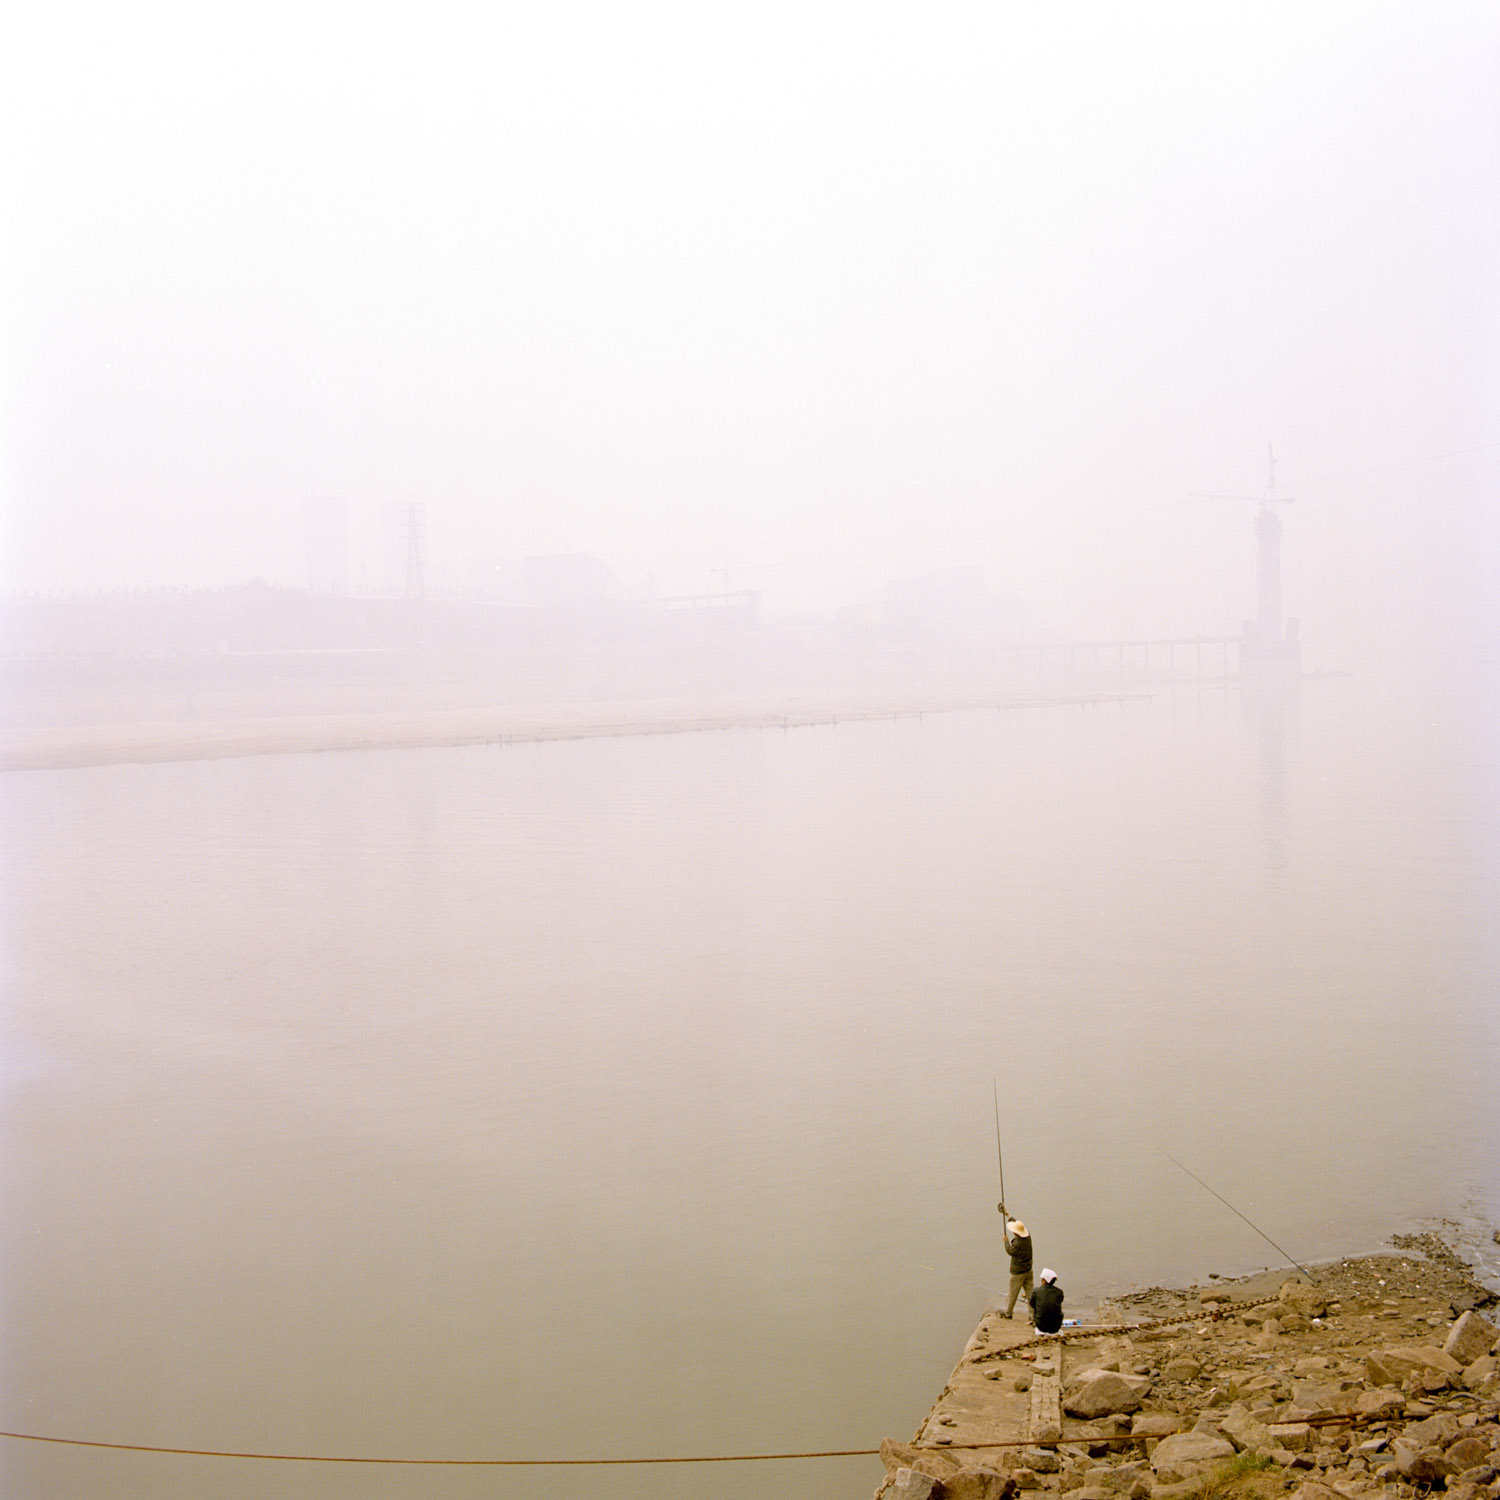  Local people fishing on the Jialing river downtown Chongqing. The polustion dust is so strong that we cant see any side of the city 